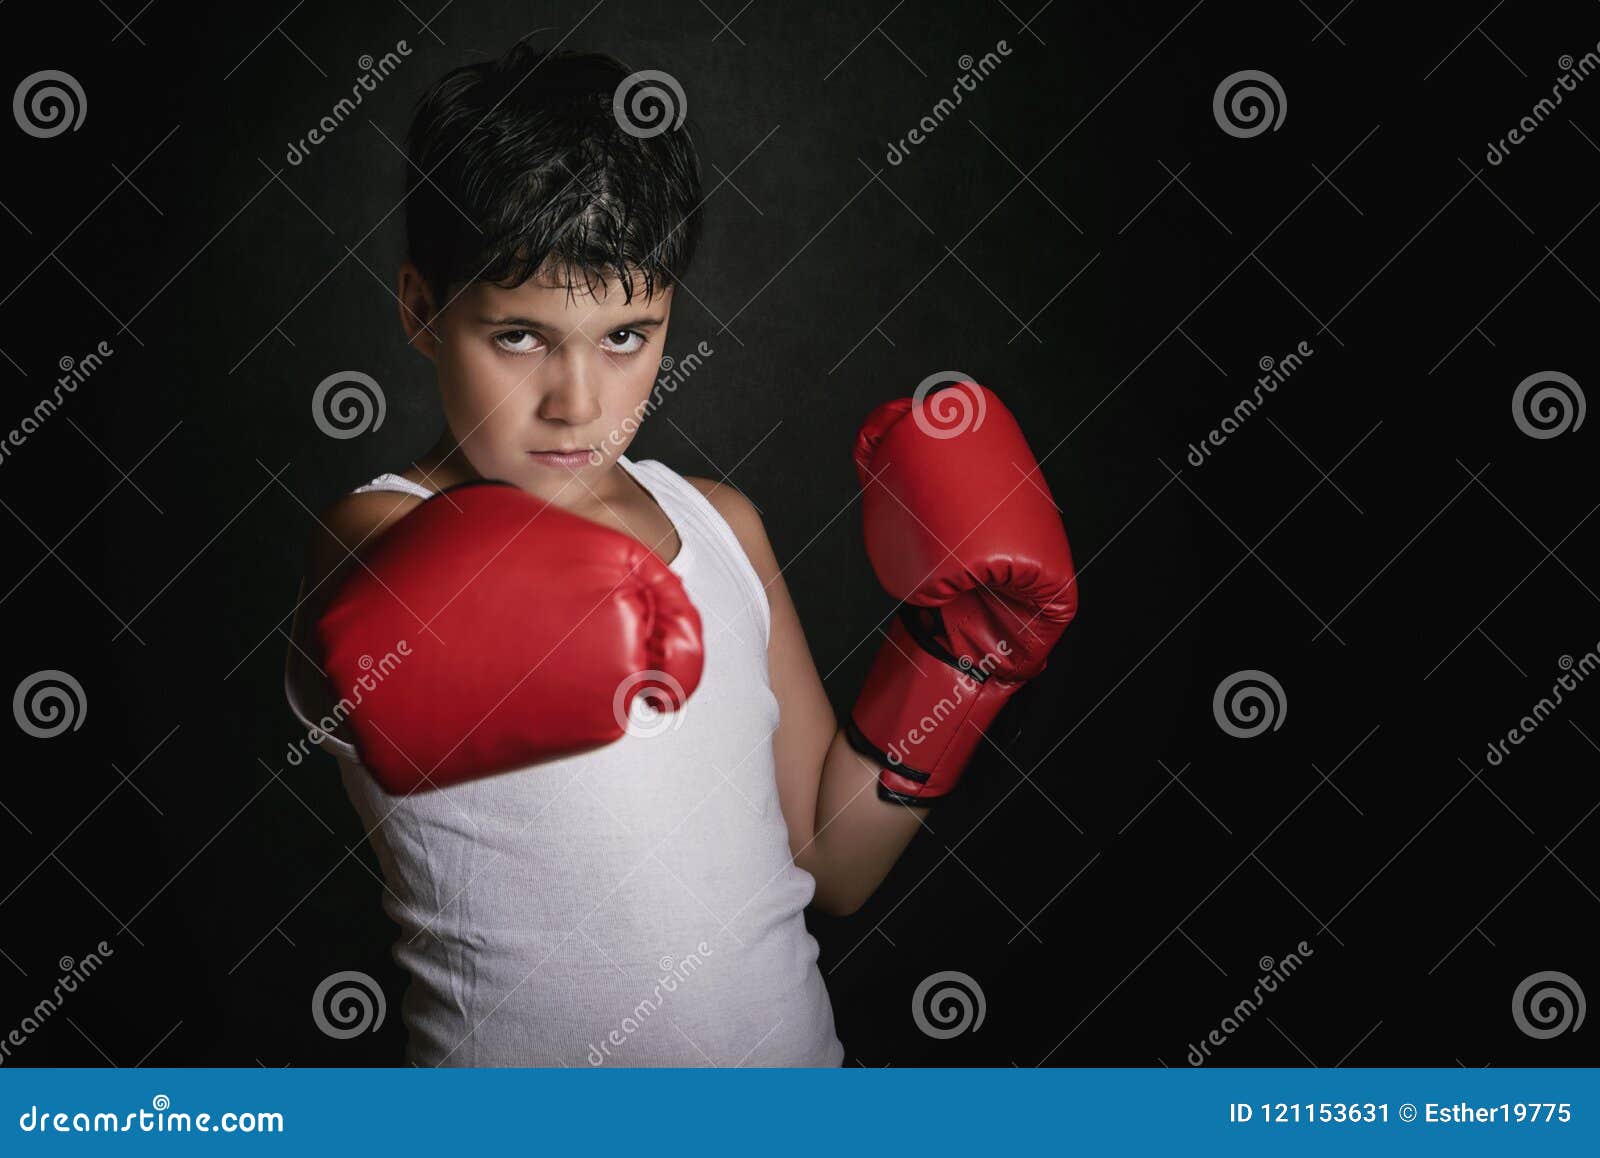 Little Boy with Boxing Gloves Stock Image - Image of fight, expression ...